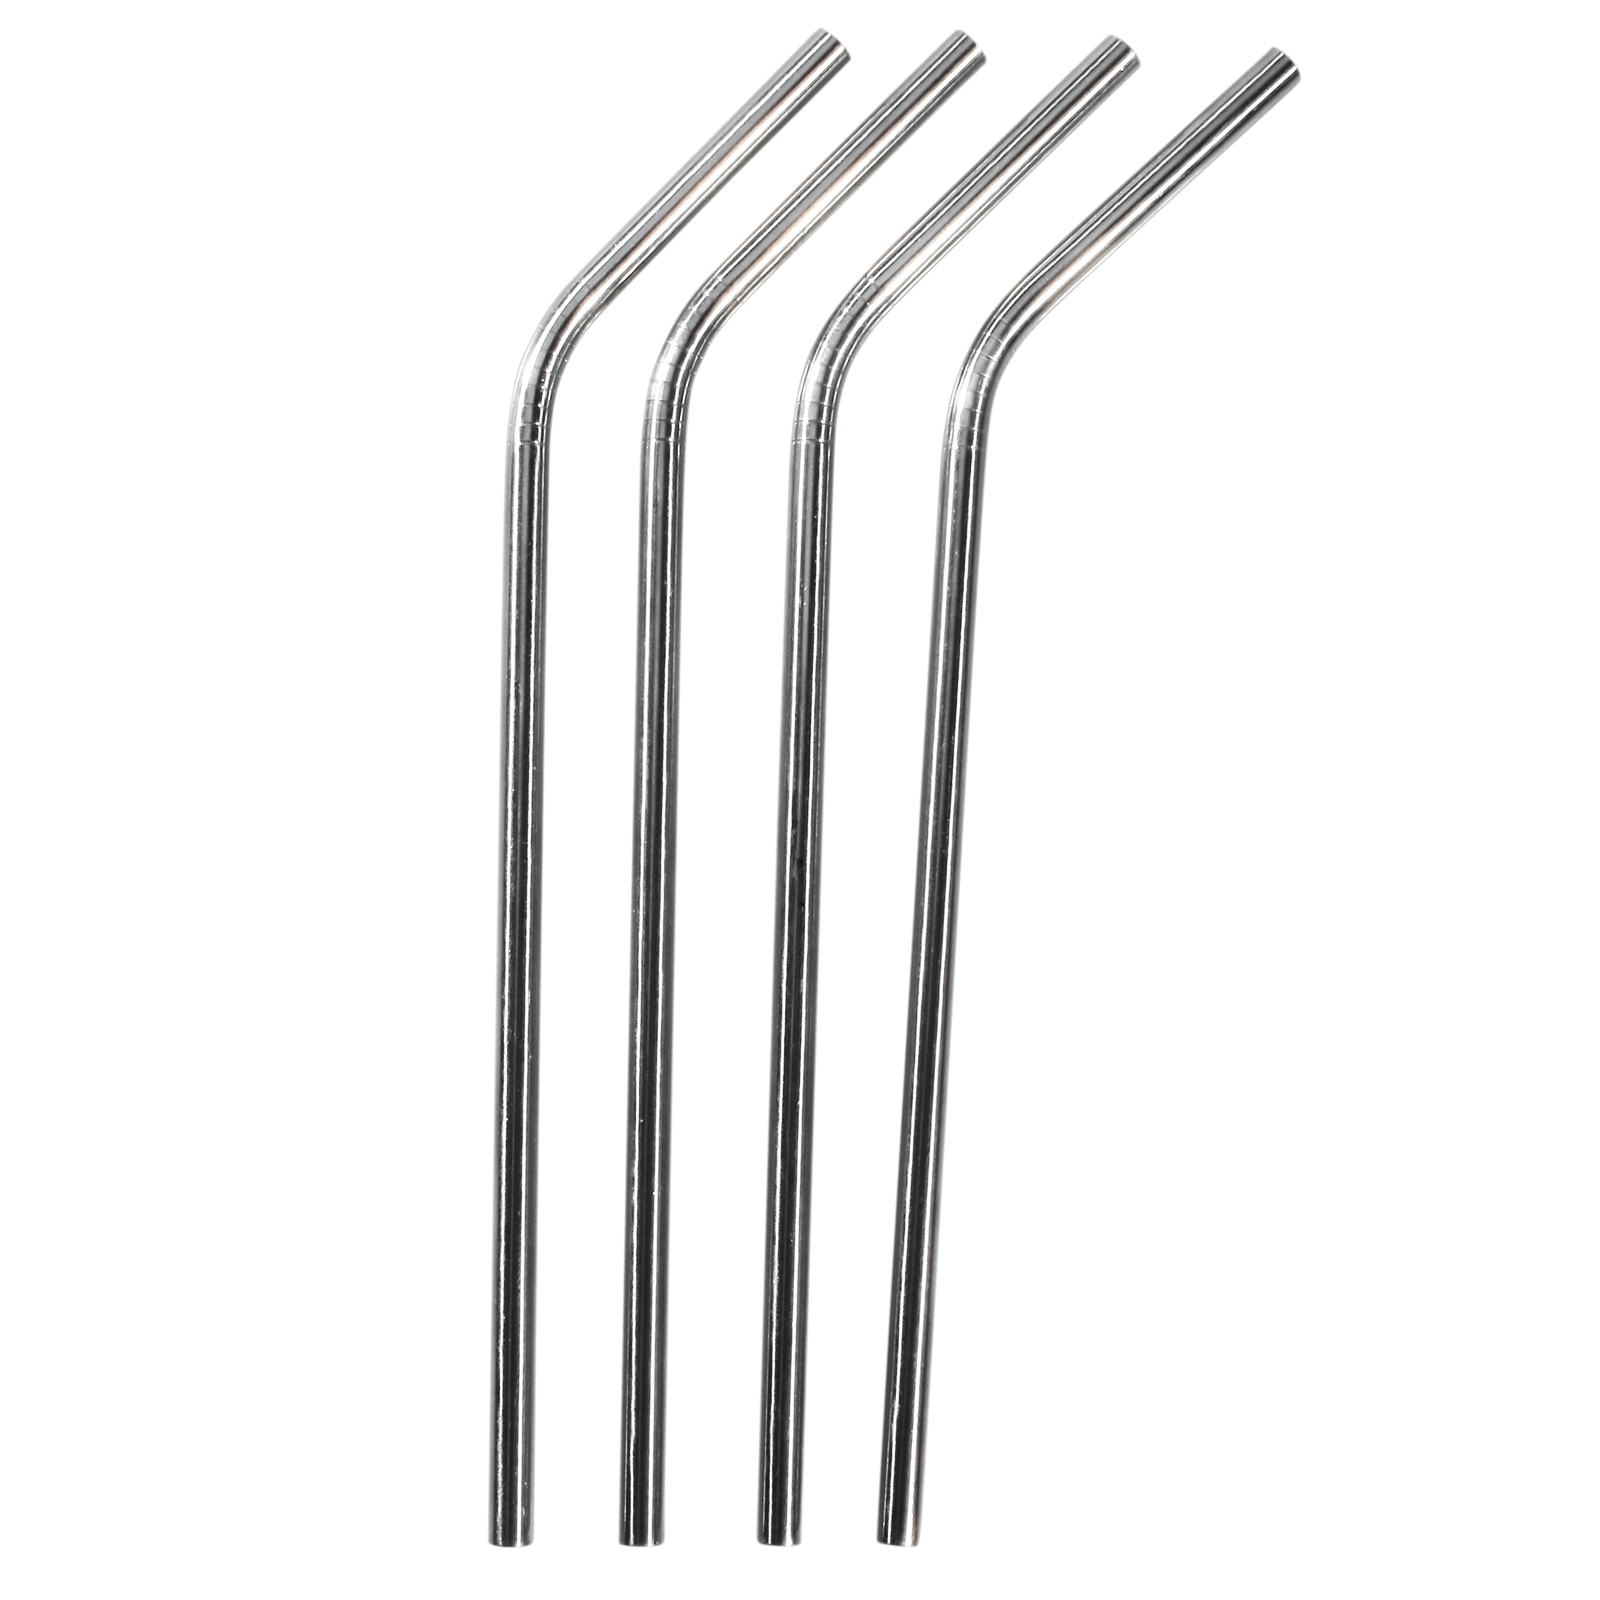 MIU COLOR™ Endurance bent 18/10 Stainless Steel Drink Straw, Set of 4 Endurance 18/10 Stainless Steel